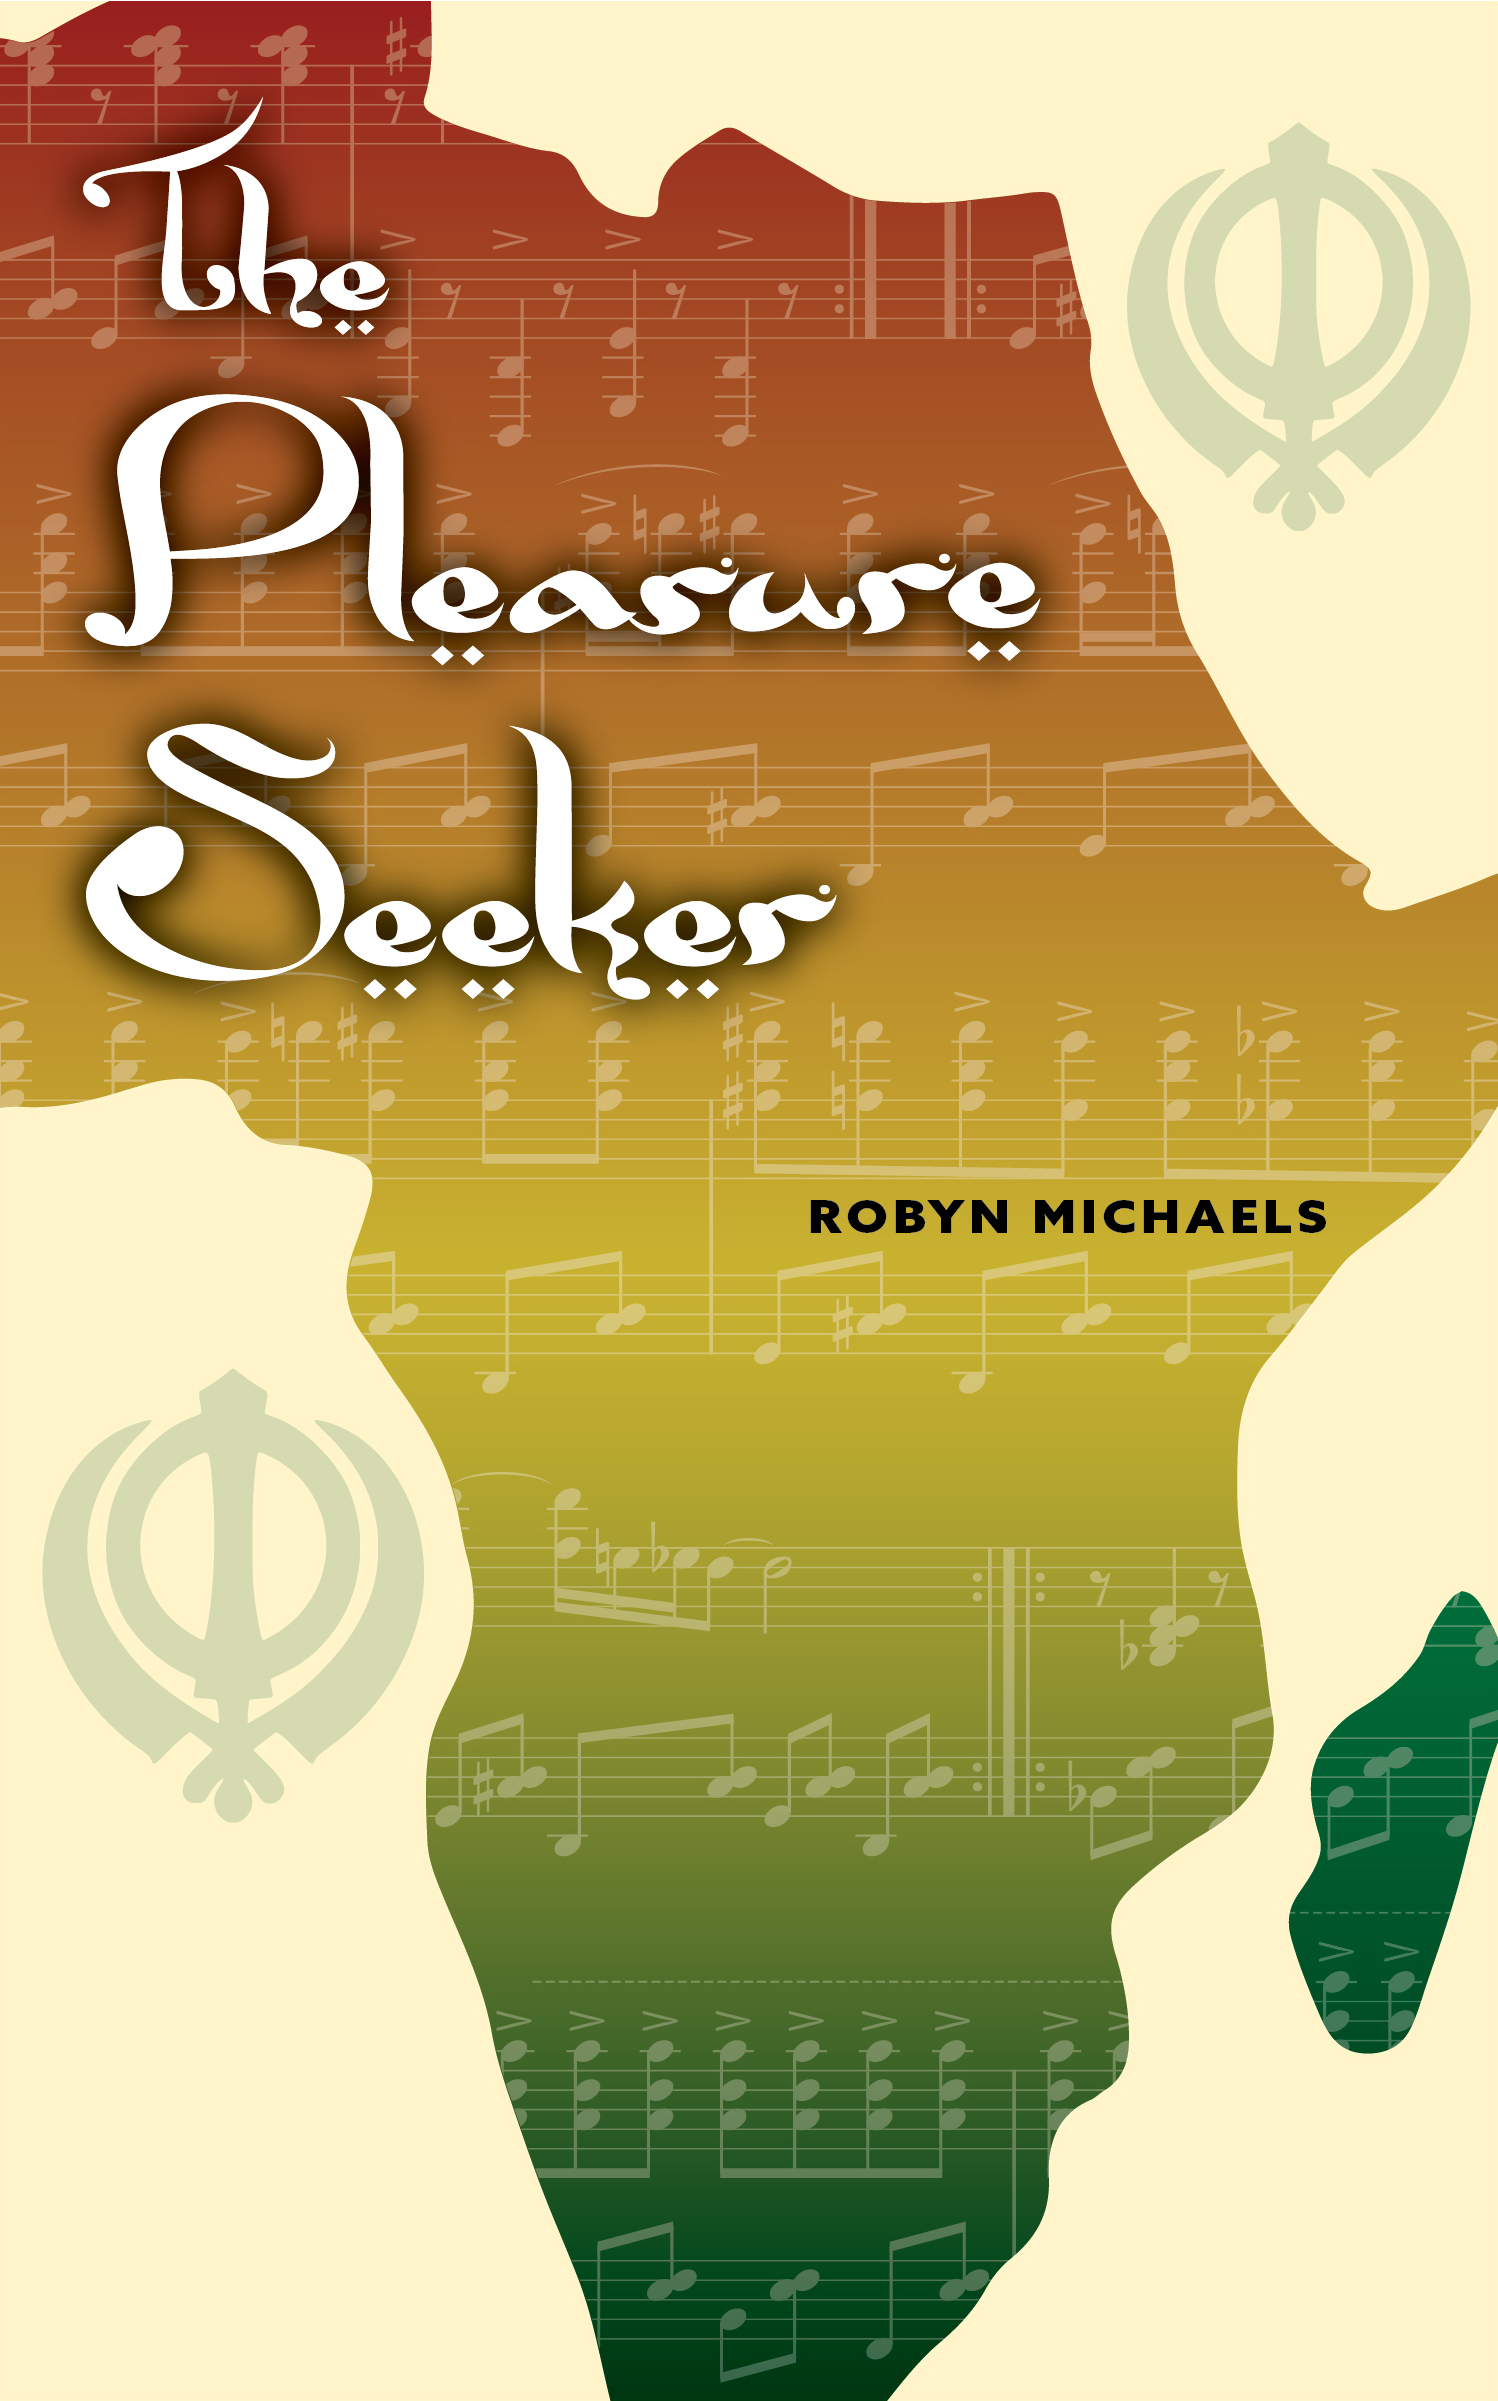 The front cover of The Pleasure Seeker by Robyn Michaels